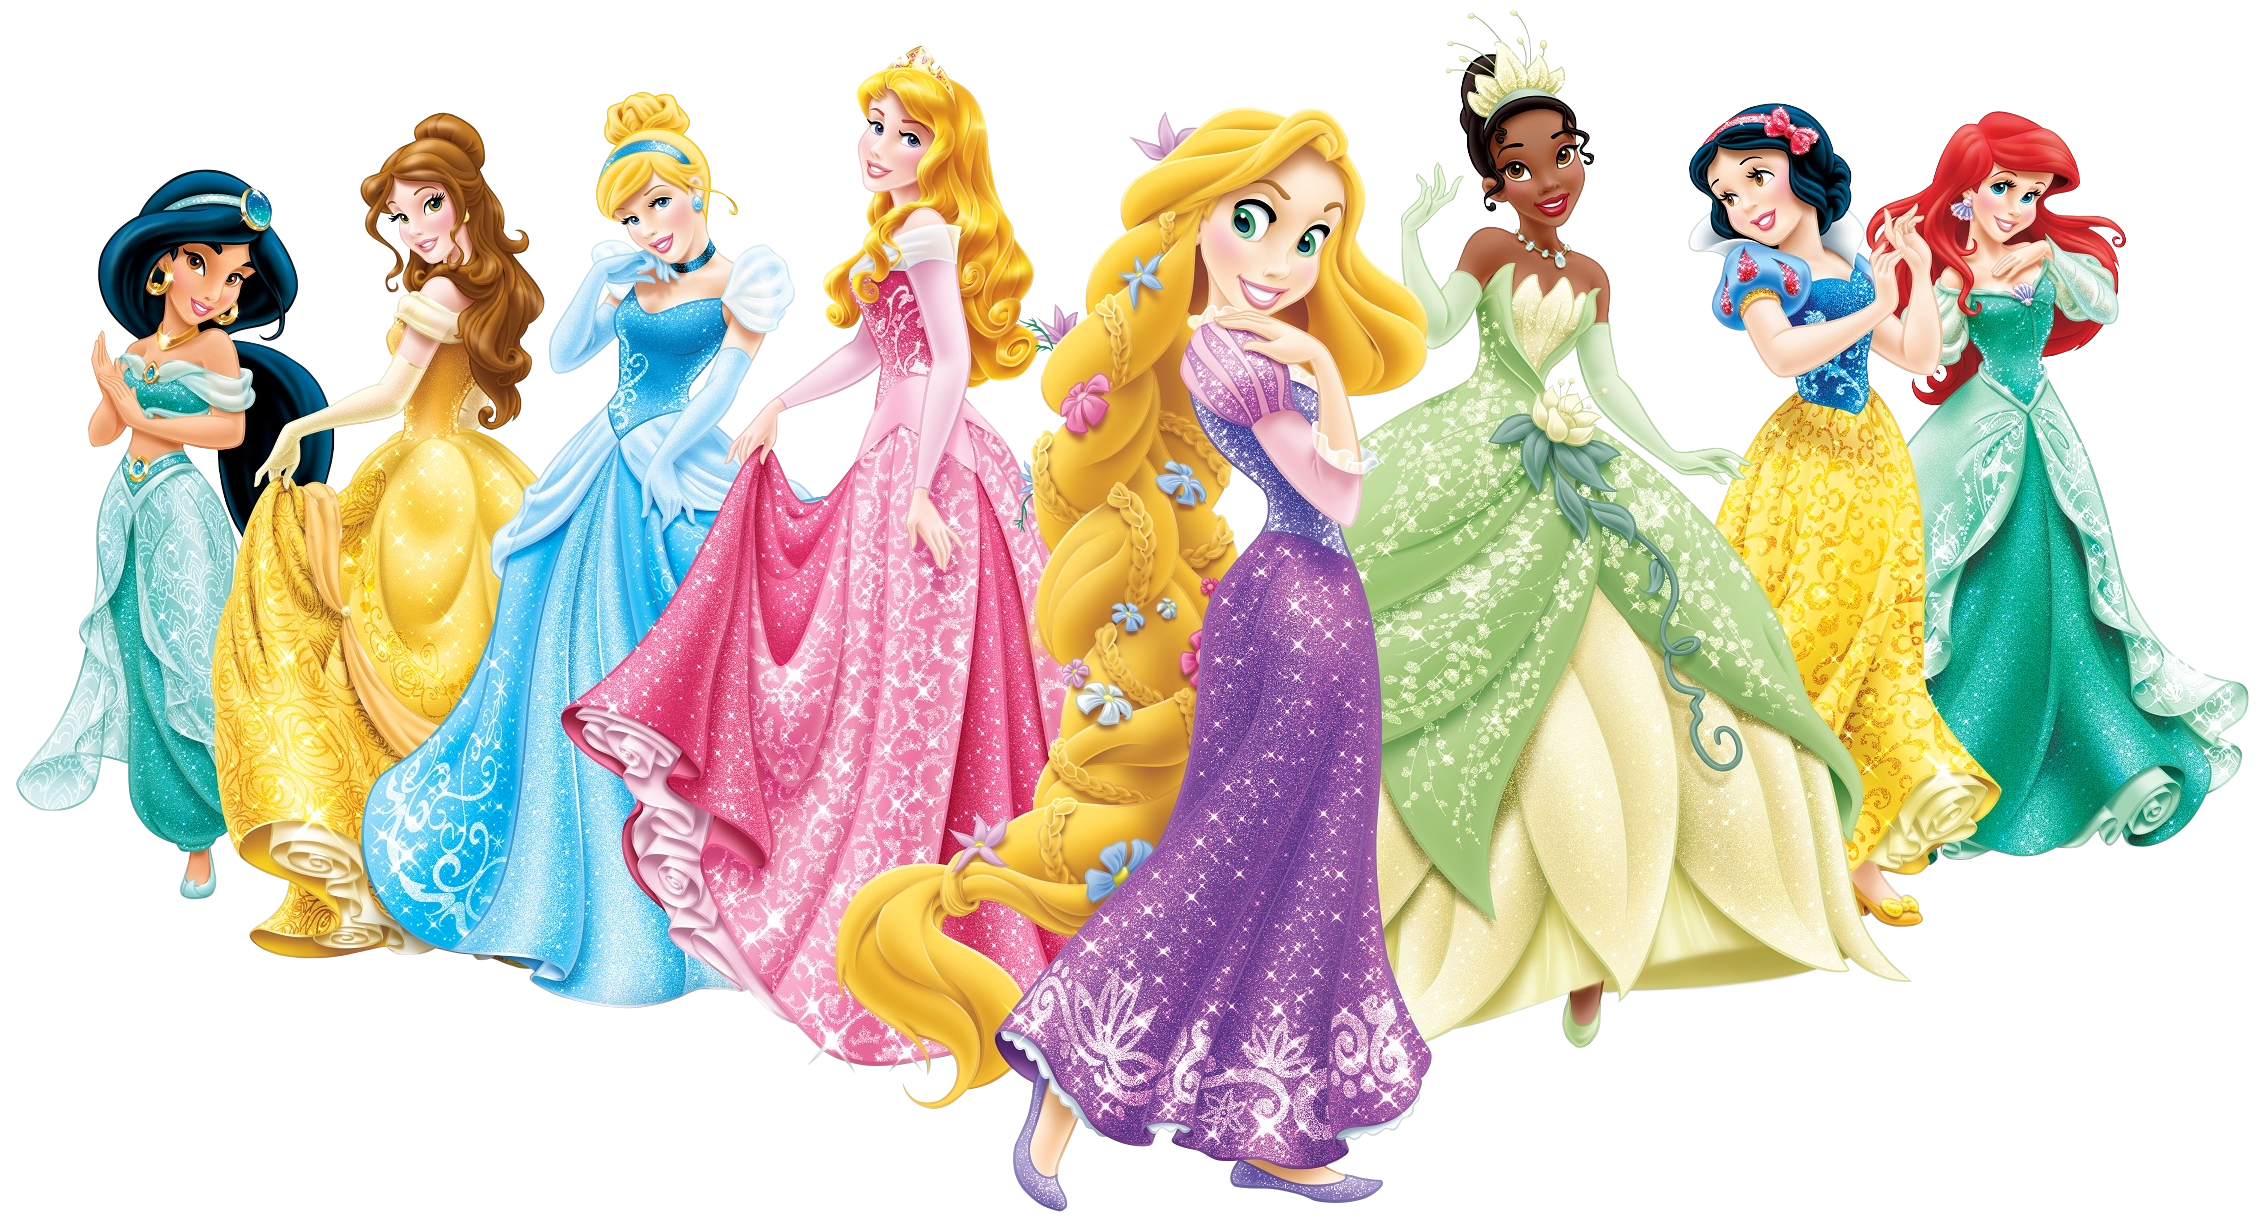 Disney Princesses PNG Cartoon Image​ | Gallery Yopriceville - High-Quality Images and Transparent PNG Free Clipart